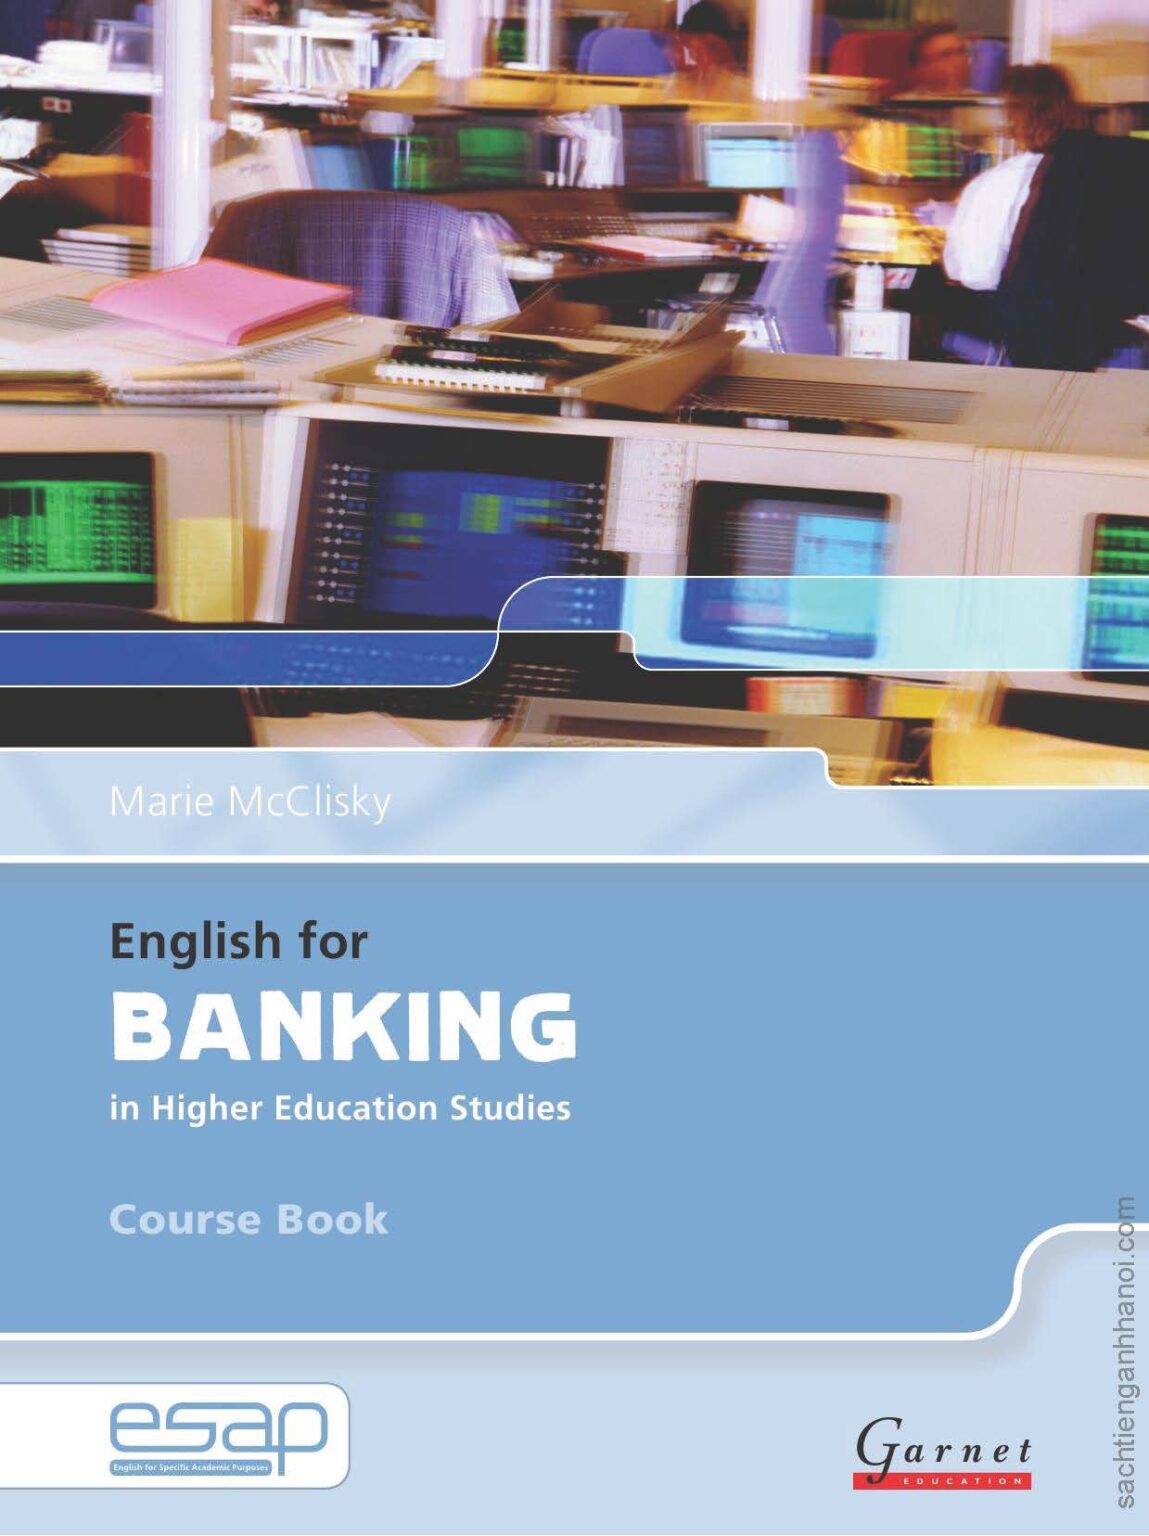 Banking book is. English for Banking. Banking English учебник. English for Banking and Finance. English for Banking and Finance 1.